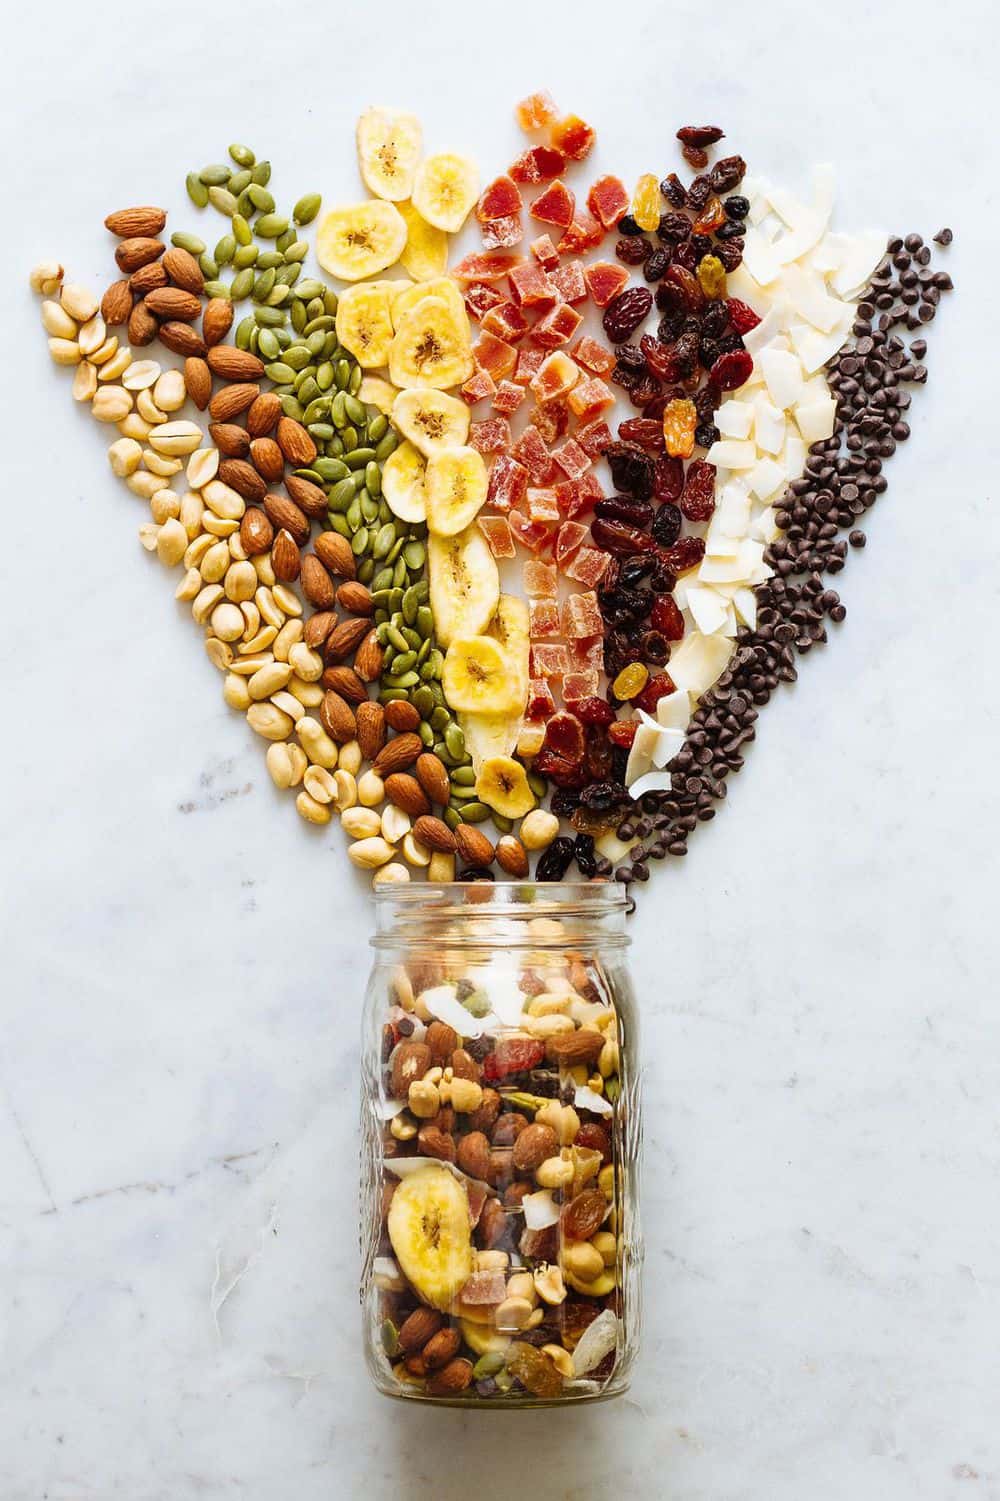 ALMOST-EVERYTHING TRAIL MIX - THE SIMPLE VEGANISTA